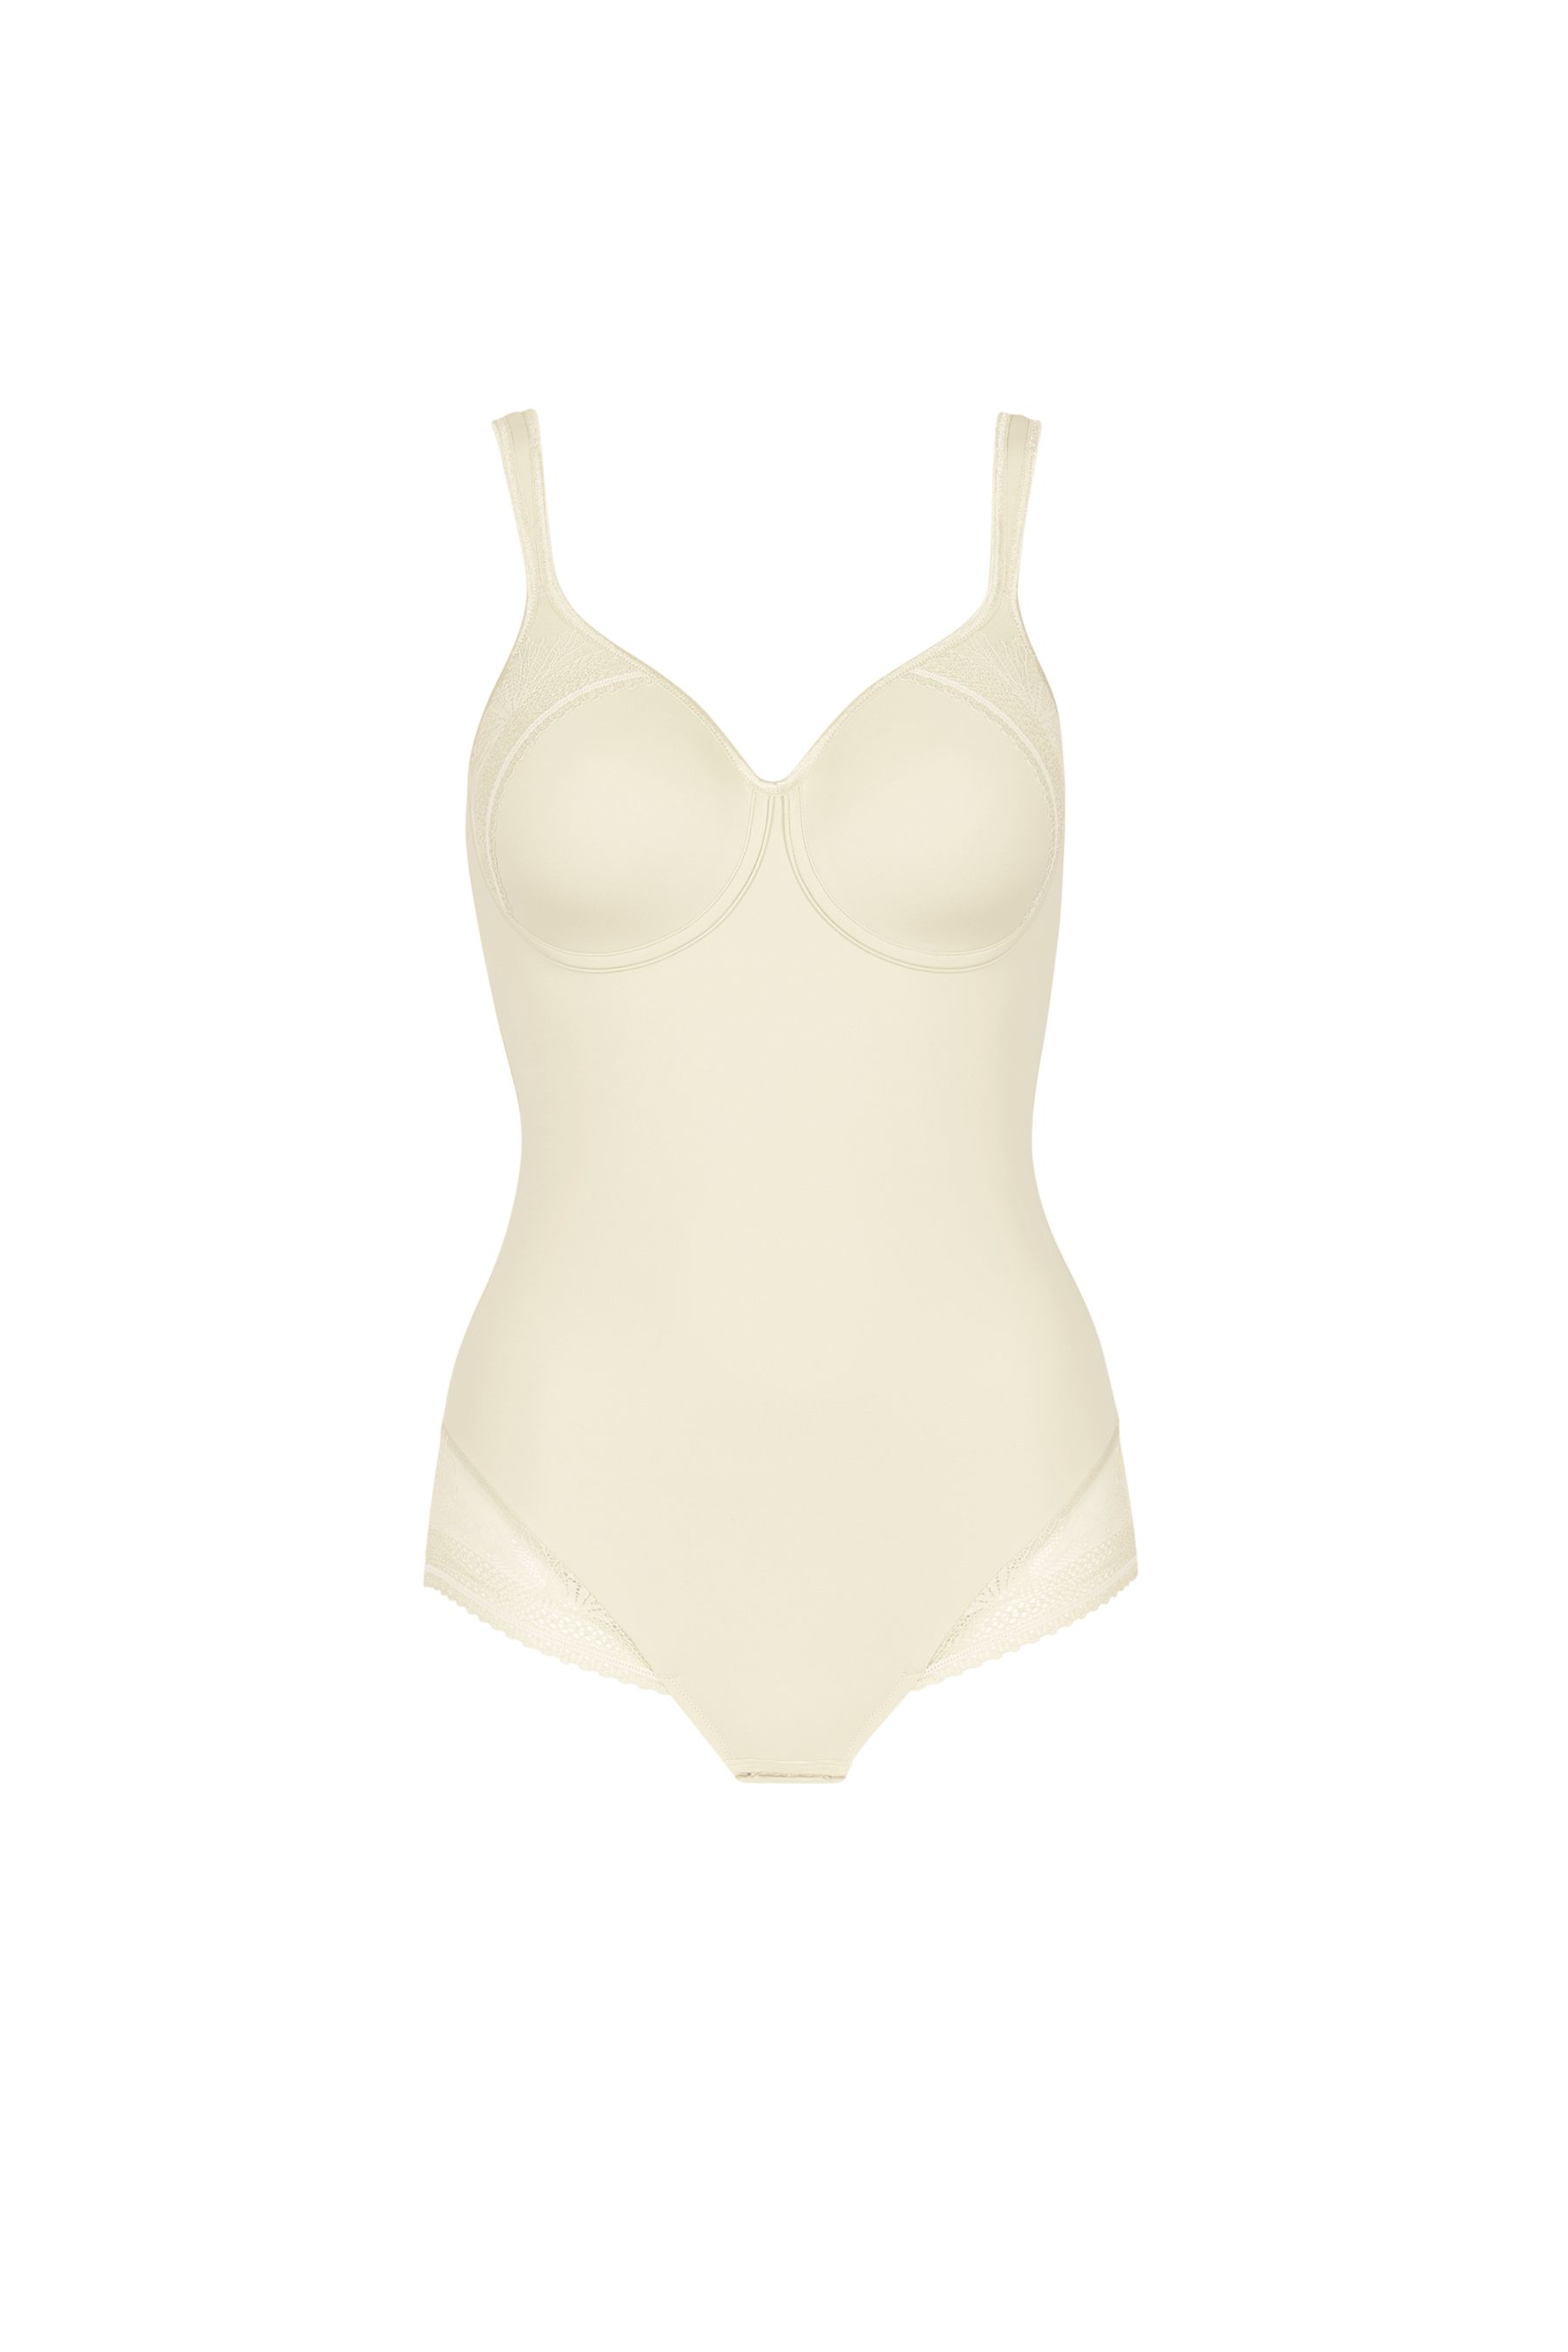 This comfortable bodysuit from the Lisca 'Gina' range is made of soft microfibre. It features lace details on the cups to add a touch of feminine elegance. The foam cups are non-wired. The front of the bodysuit is lined and slightly shaping. The thin lace trim on the leg openings is invisible underneath clothing. This comfortable bodysuit is a practical and elegant choice, especially during cold days.